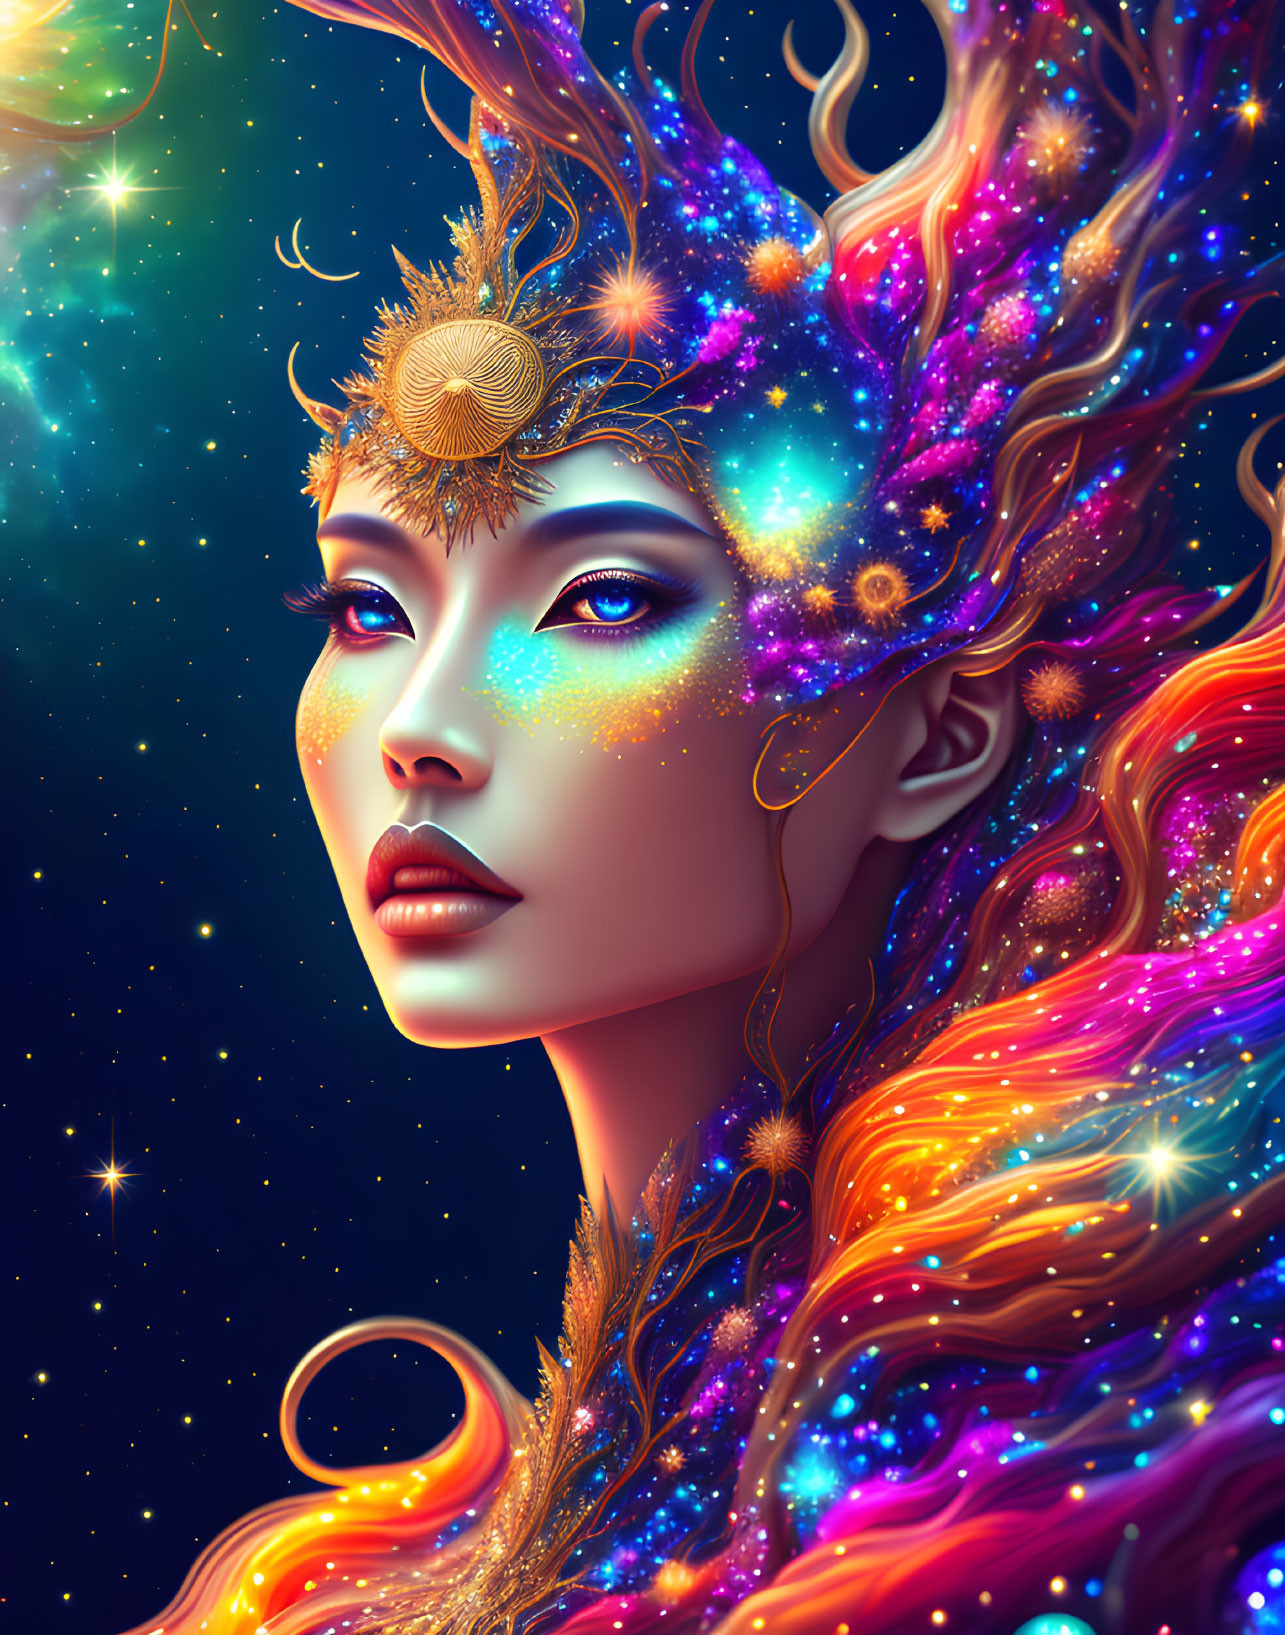 Cosmic-themed digital artwork of a woman with vibrant makeup and starry hair